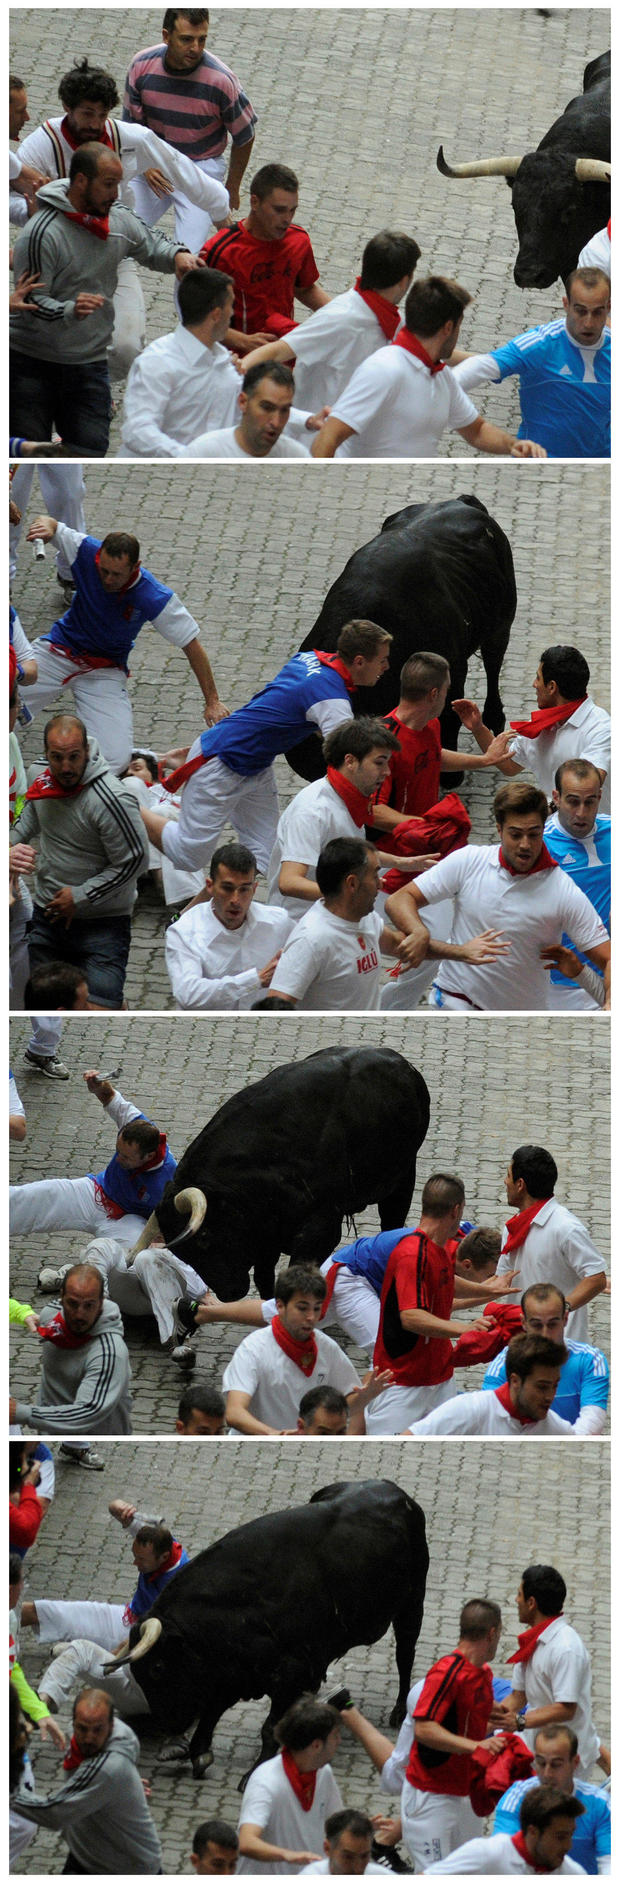 FILE PHOTO: A combination photo shows American Bill Hillmann getting gored in the right thigh during the third running of the bulls at the San Fermin festival in Pamplona 